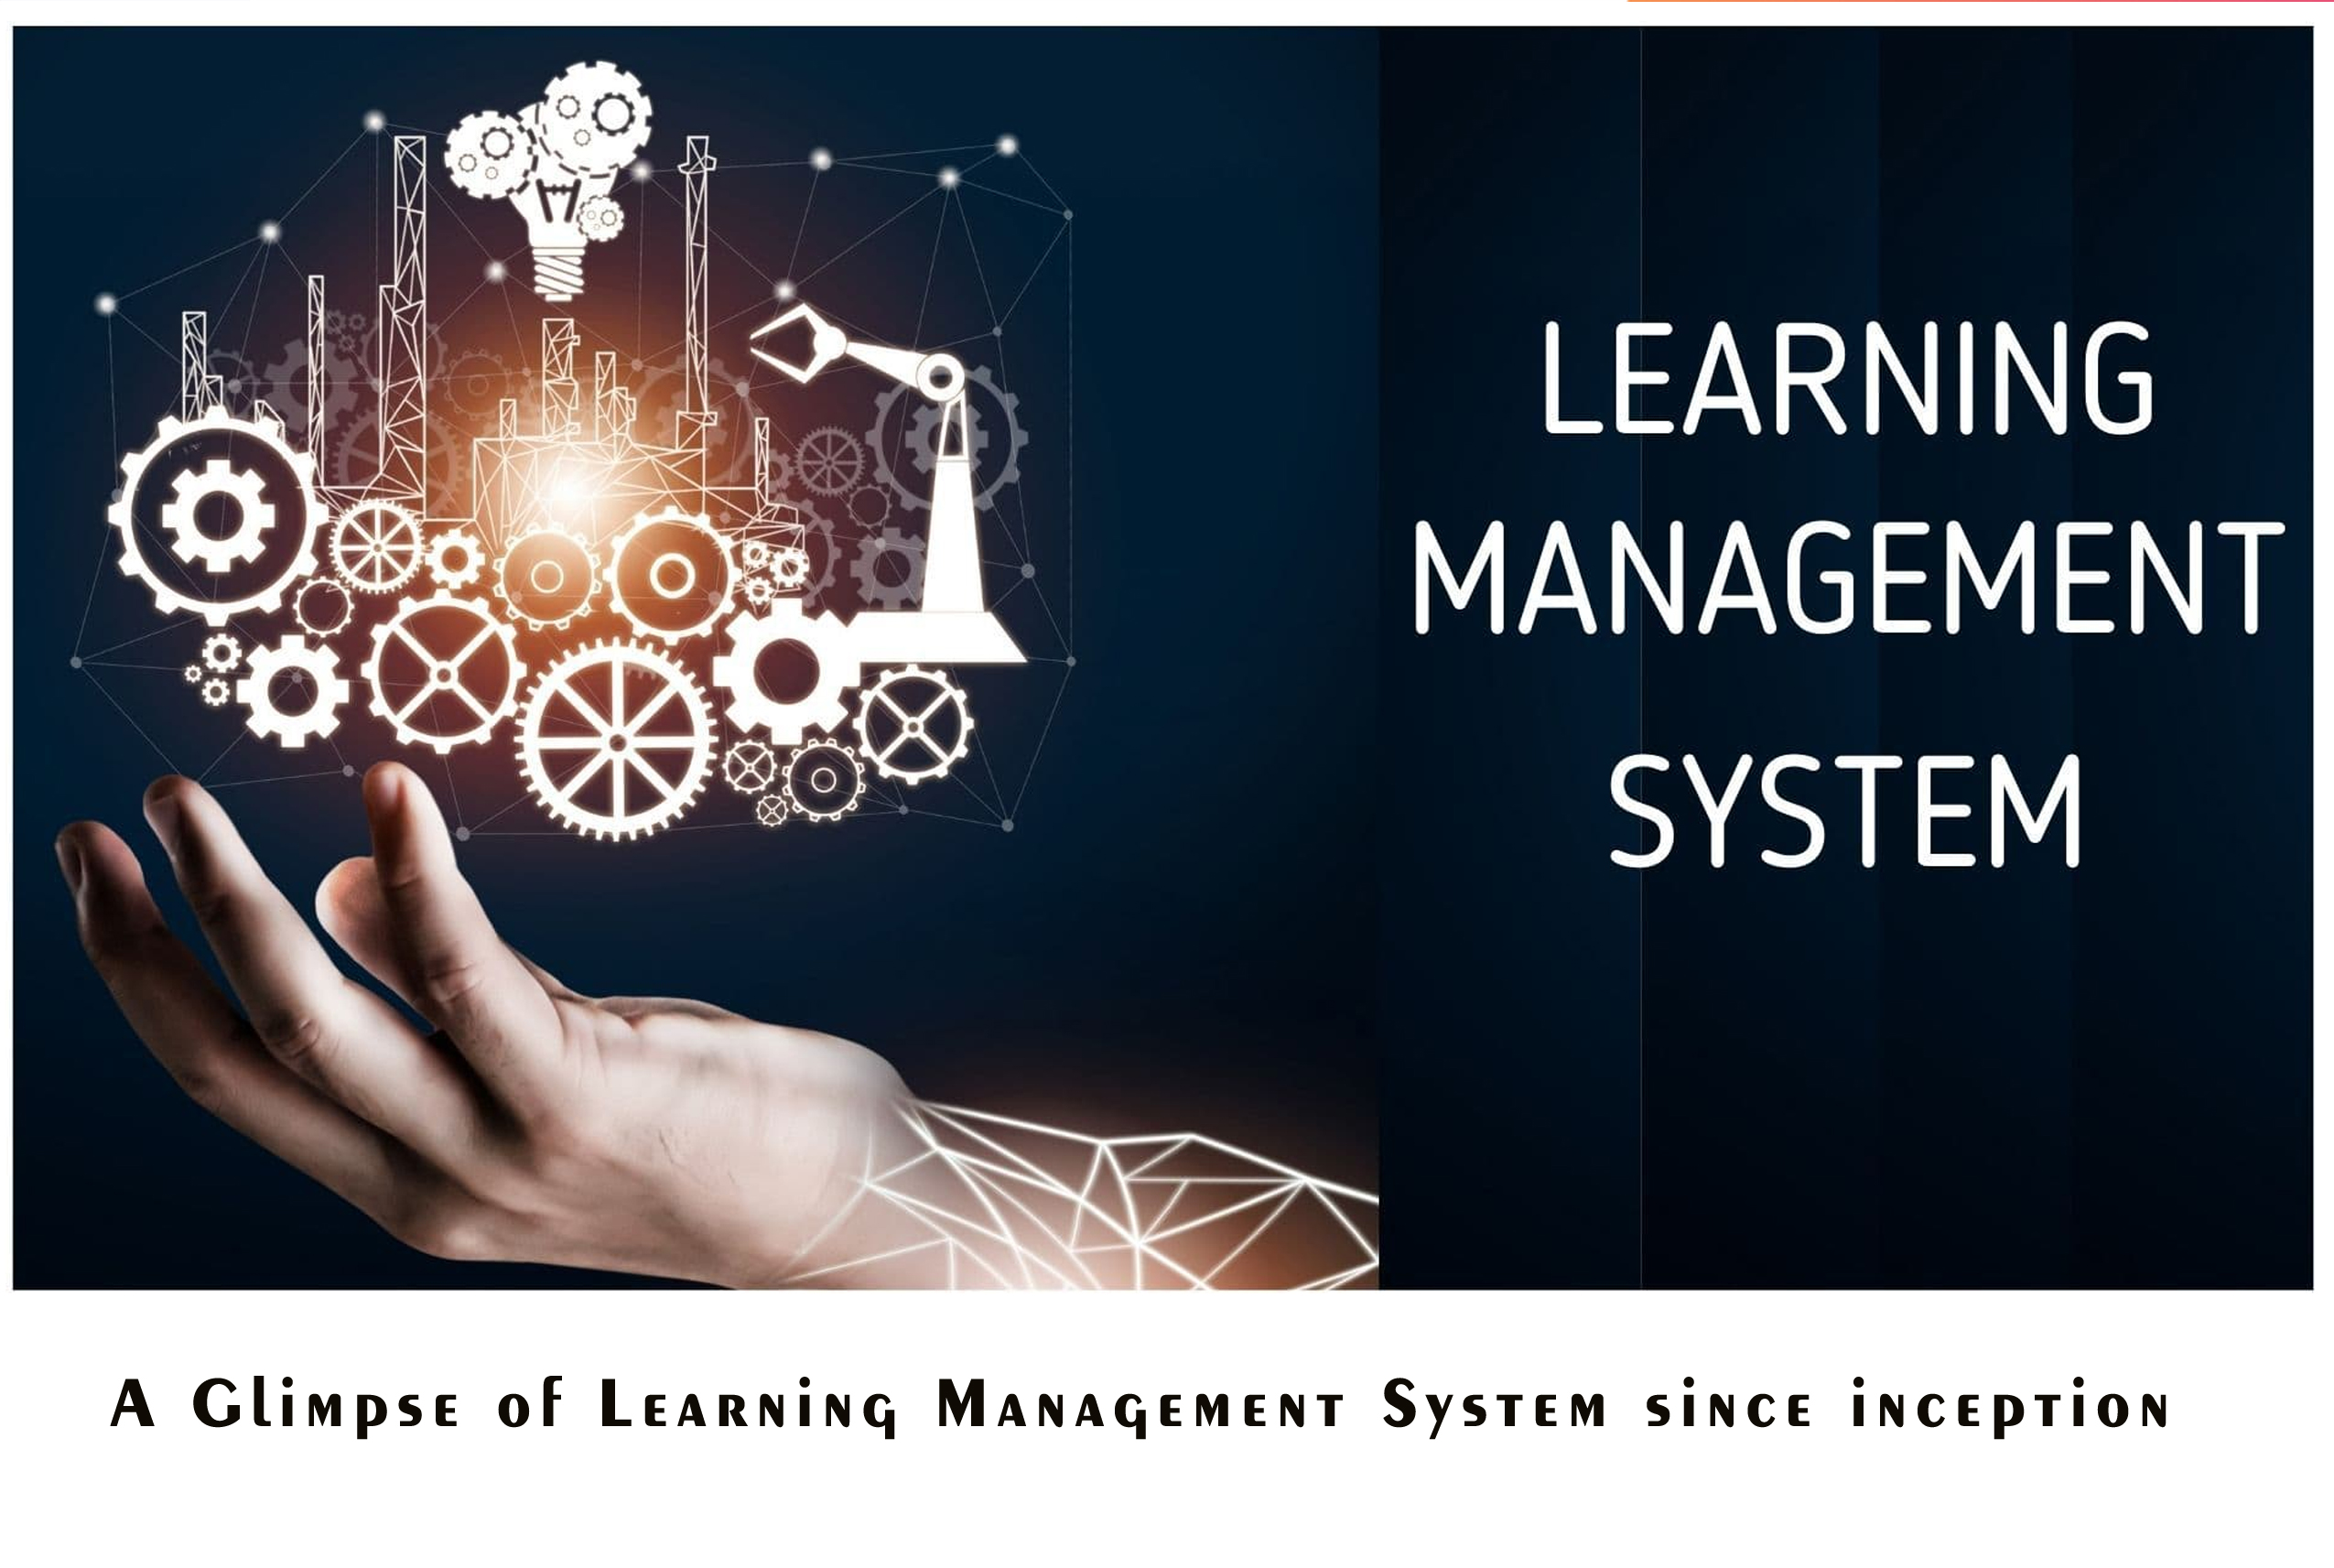 A Glimpse of Learning Management System since inception